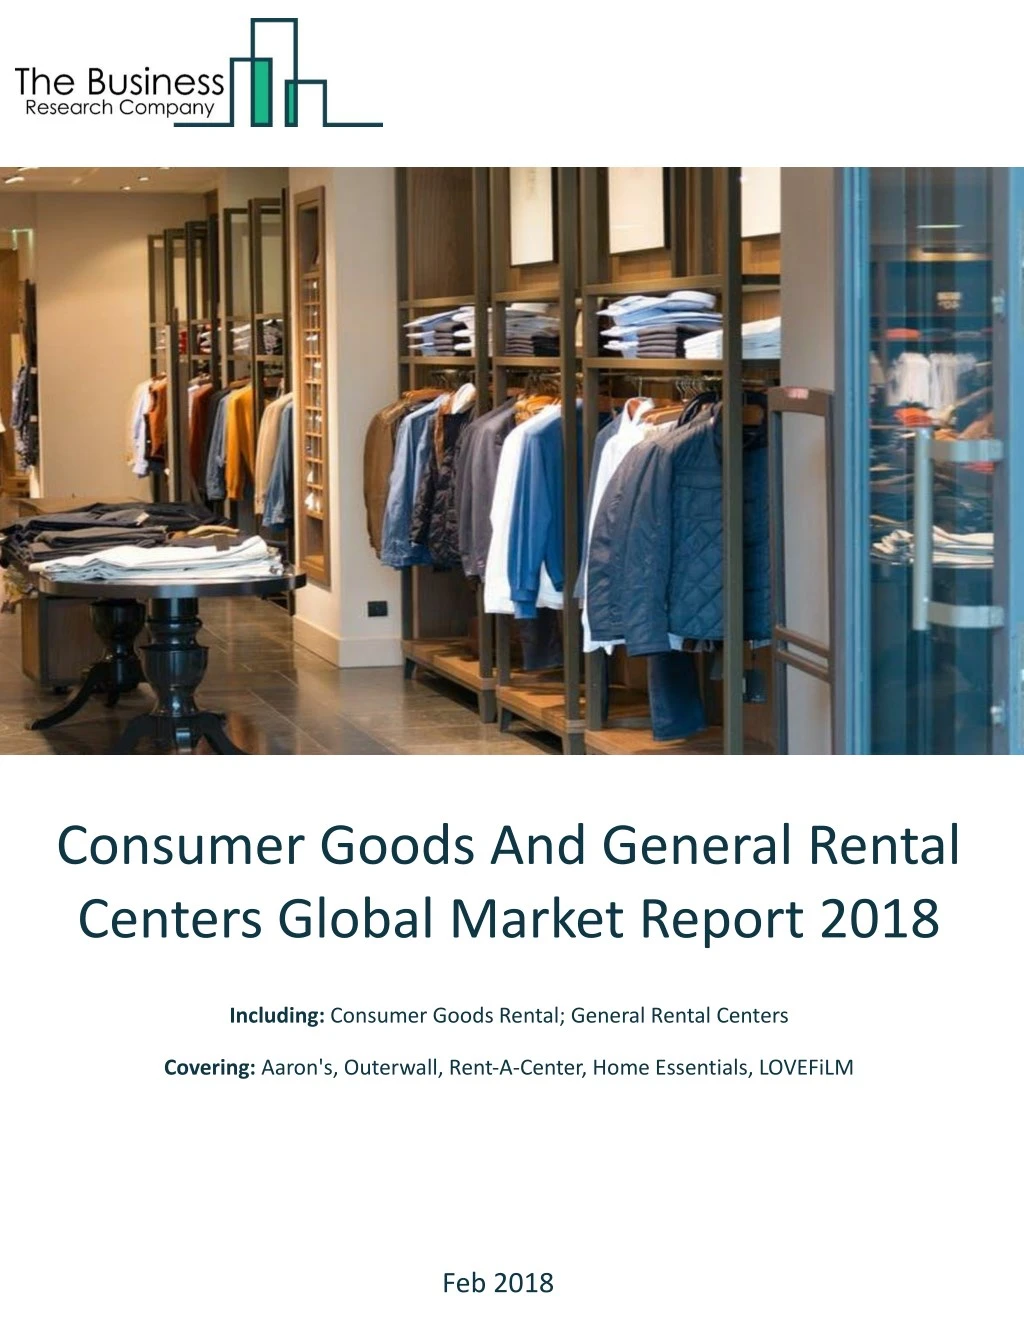 consumer goods and general rental centers global